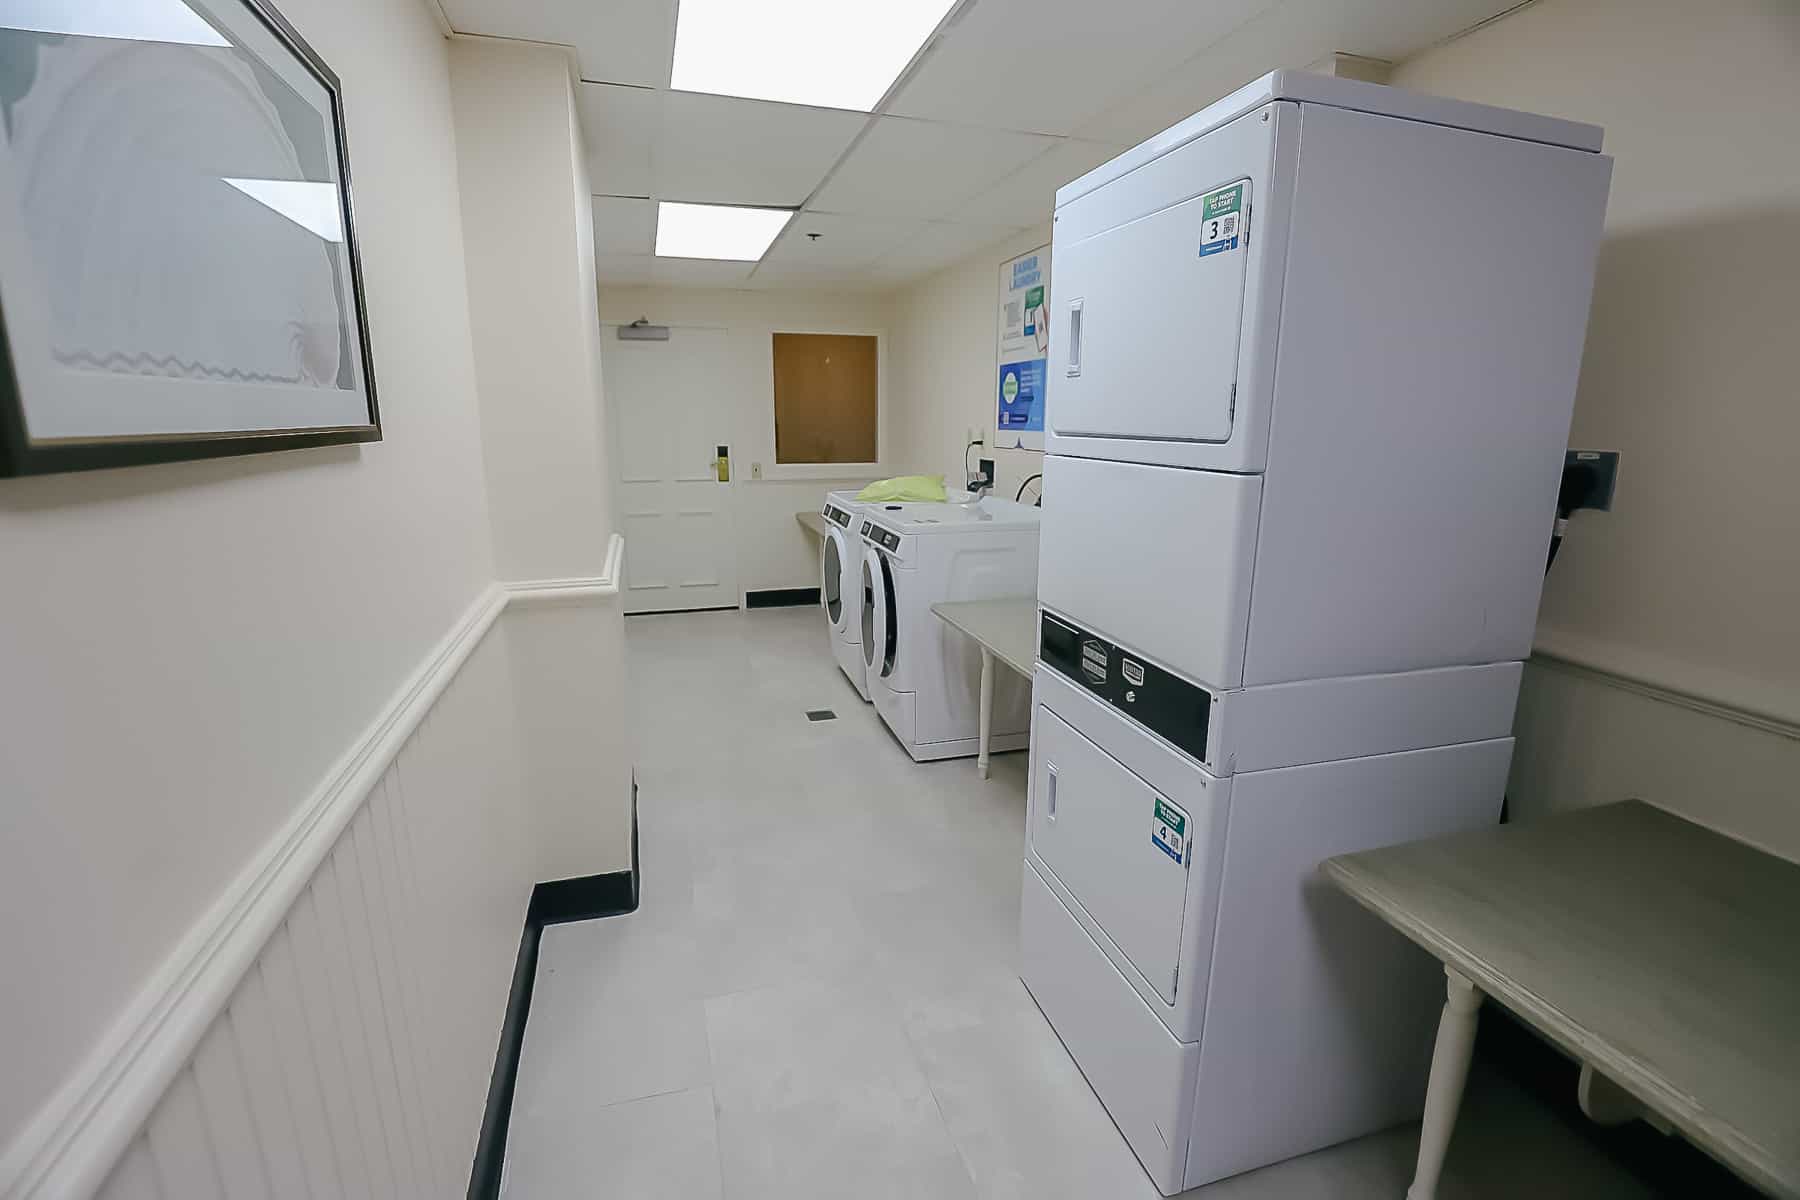 Additional washers and dryers in the secondary laundry room at Disney's Beach Club.